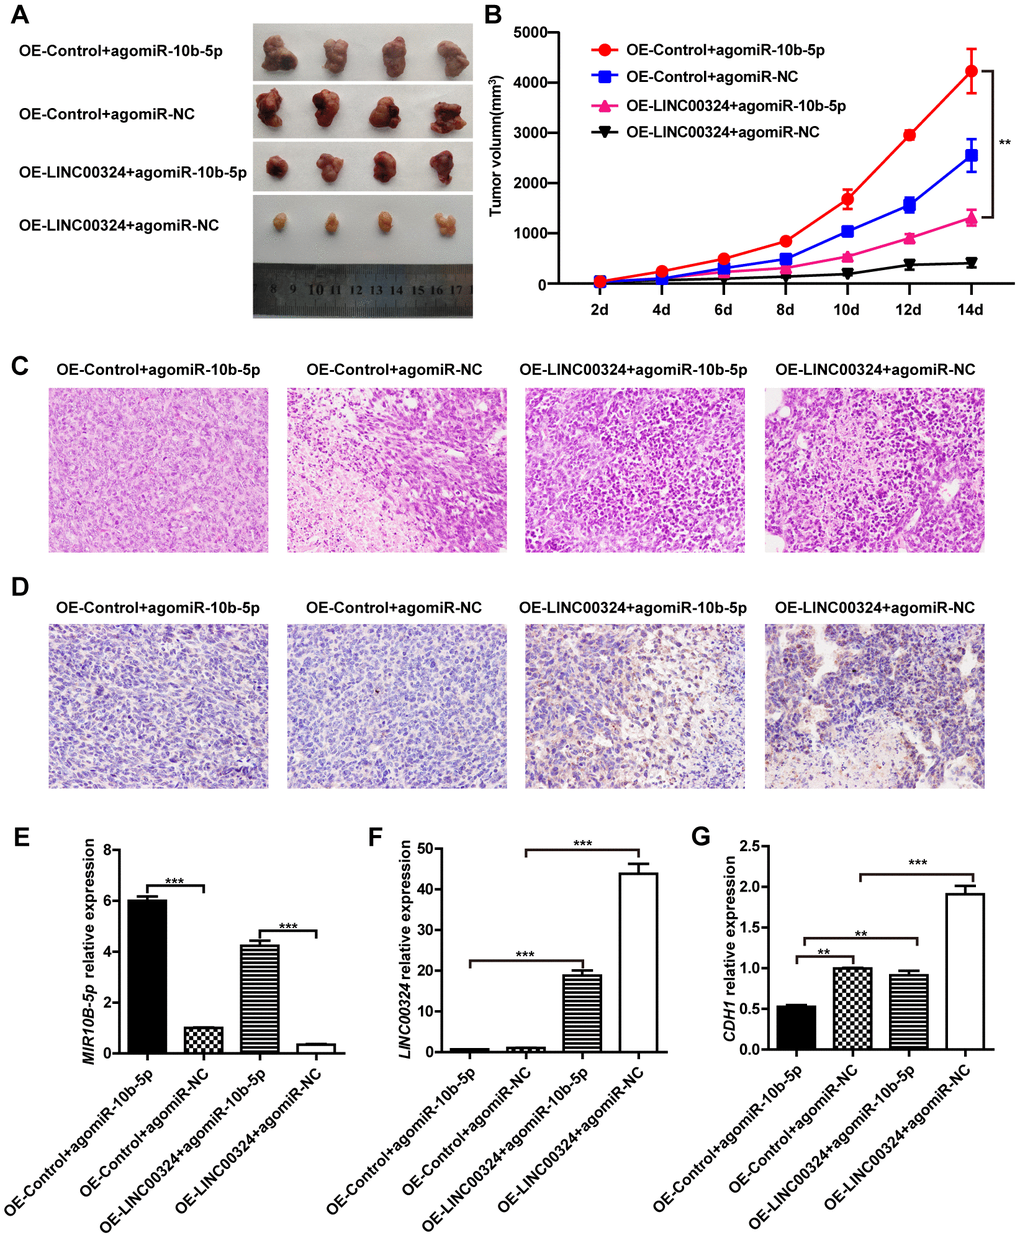 LINC00324 inhibited tumor growth in nude mice xenograft models. (A) Dissection of tumors from non-obese diabetic (NOD) mice xenografted with agomiR-10b-5p alone or combined with overexpressed-LINC00324 MDA-MB-231 cells. (B) Tumor volume curve of overexpressed-LINC00324 and agomiR-10b-5p treatment groups were measured and analyzed. (C) Hematoxylin and eosin-stained images of breast cancer tissues from NOD mice xenografted with agomiR-10b-5p alone or combined with overexpressed-LINC00324 MDA-MB-231 cells. (D) Immunohistochemical staining of E-cadherin expression in breast cancer tissues from NOD mice xenografted with agomiR-10b-5p alone or combined with overexpressed-LINC00324 MDA-MB-231 cells. (E–G) Relative expression of miR-10b-5p, LINC00324, and CDH1 in breast cancer tissues from NOD mice xenografted with agomiR-10b-5p alone or combined with overexpressed-LINC00324 MDA-MB-231 cells. All data are shown as means ± SEM. ** P P B, E–G), or are representative of three independent experiments with similar results (A, C, D).